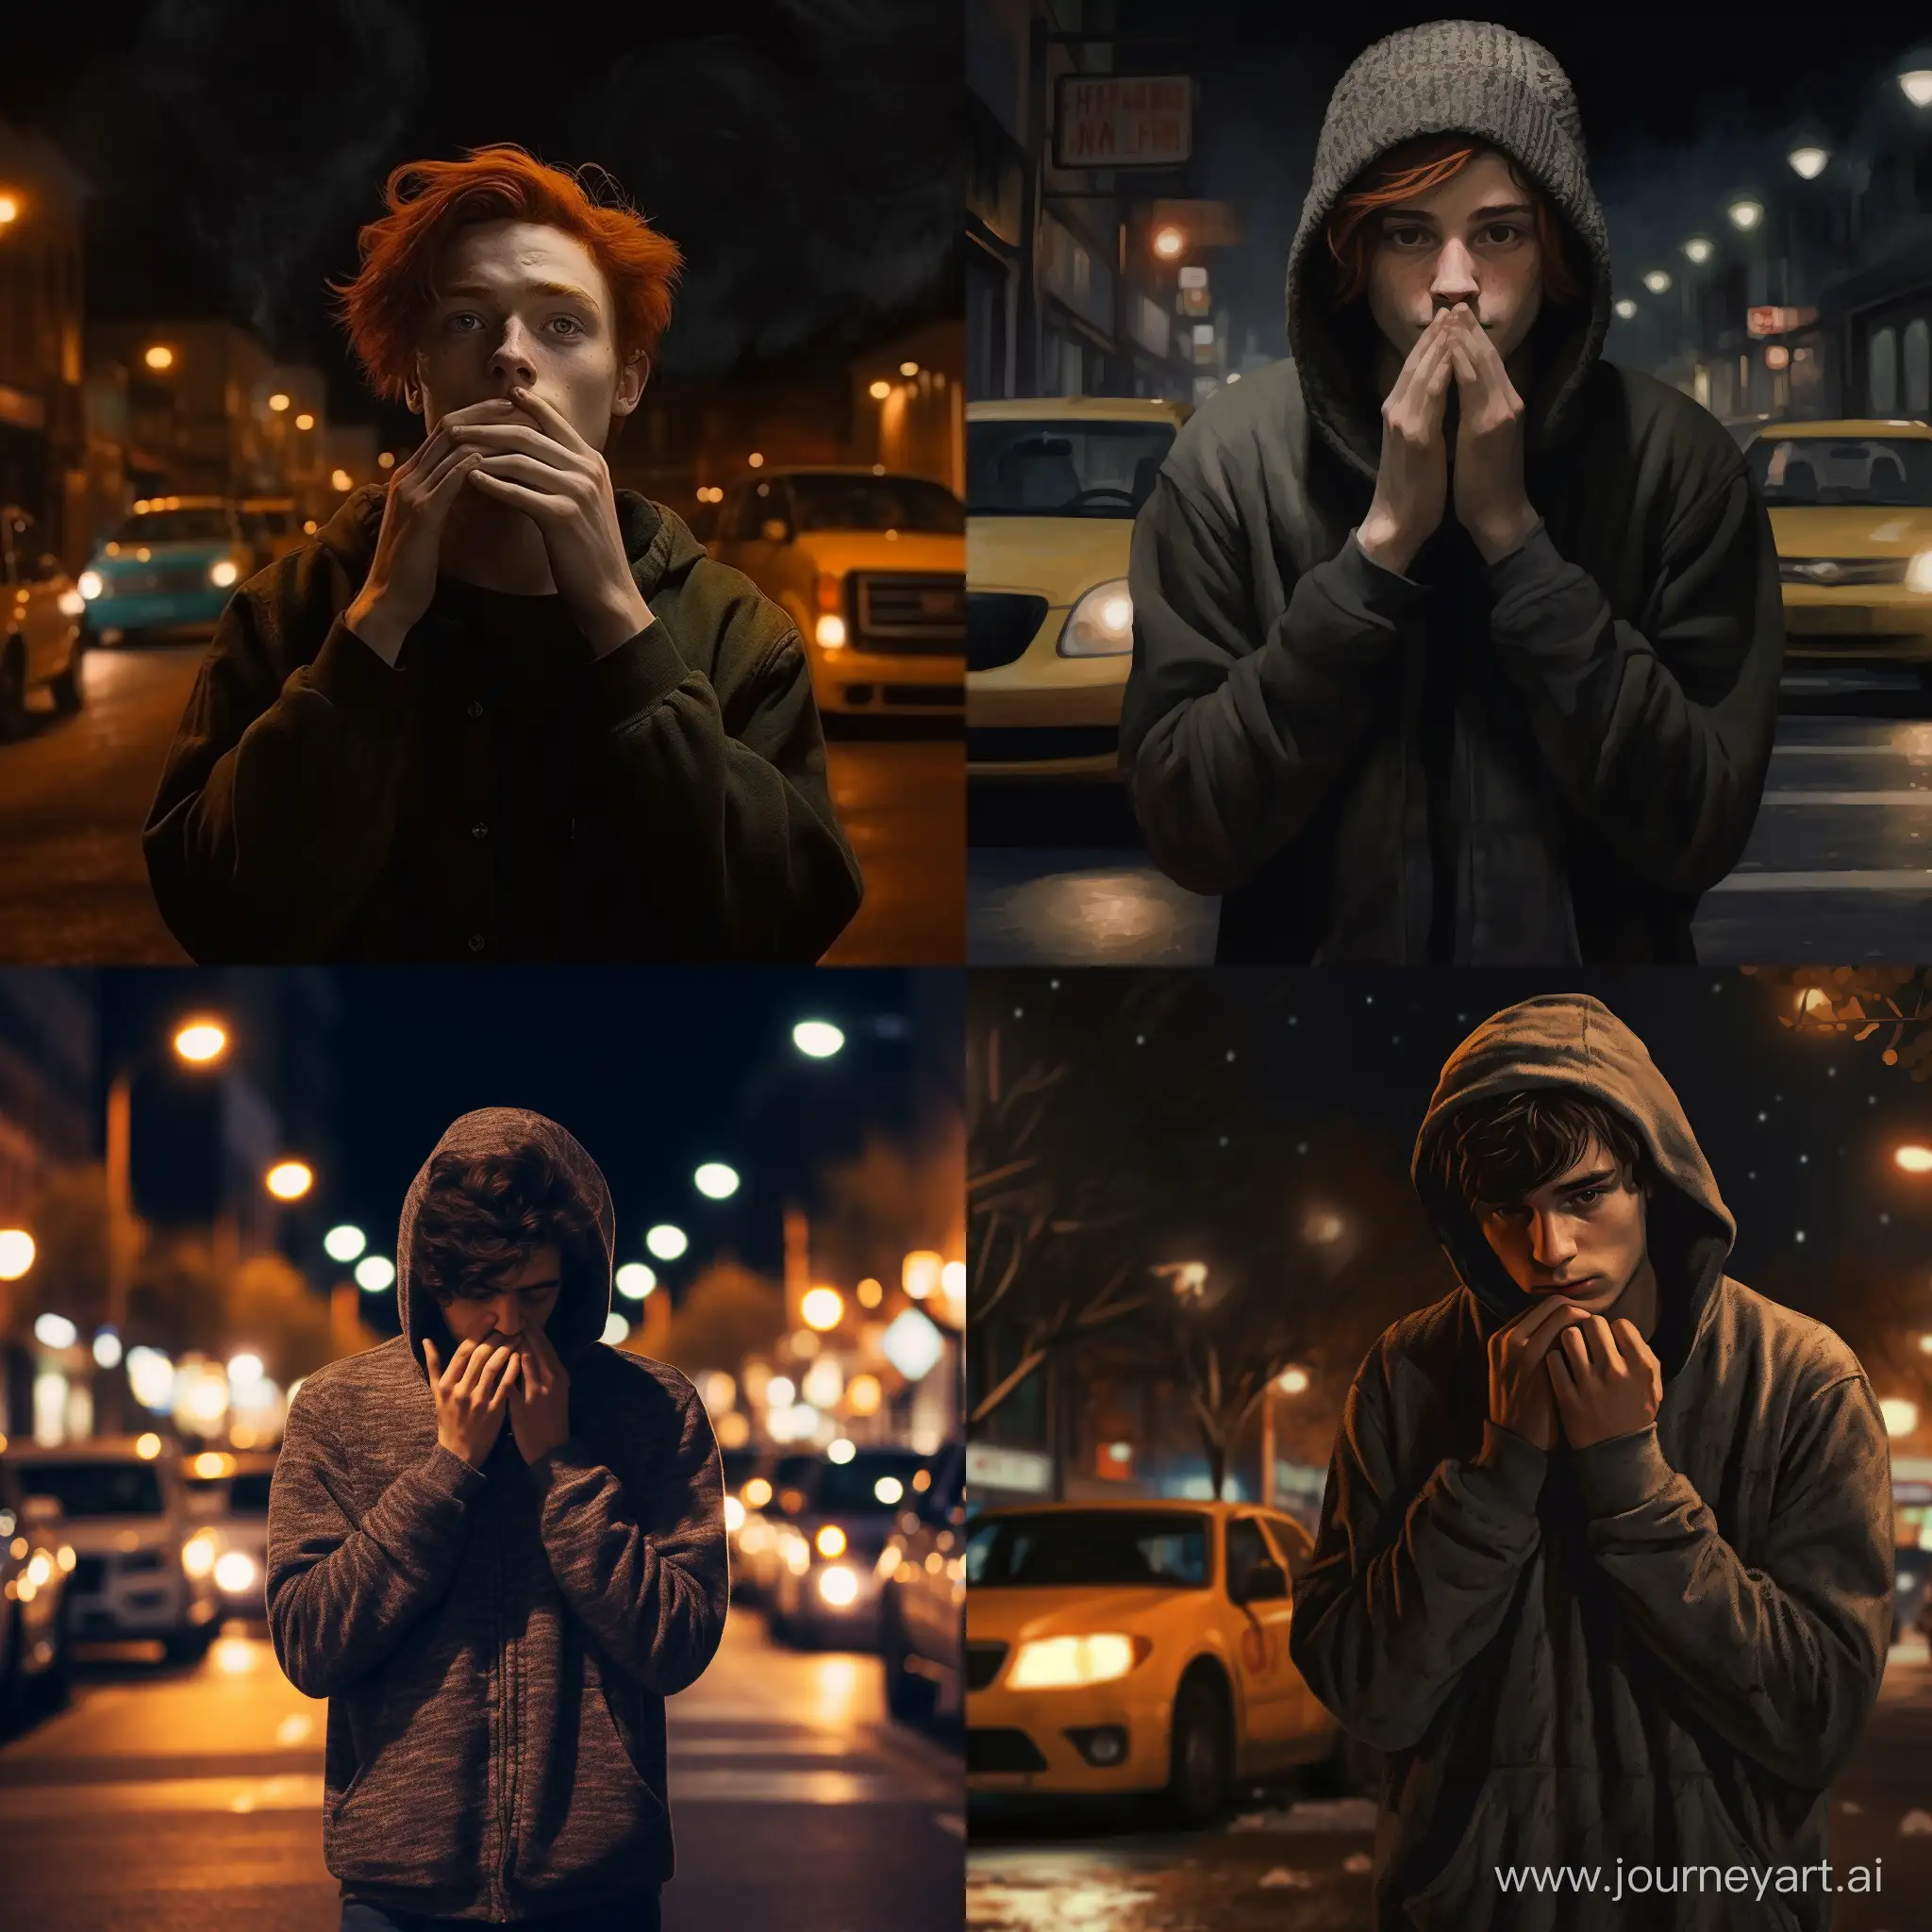 Freckled-Young-Man-Embracing-Solitude-in-City-Night